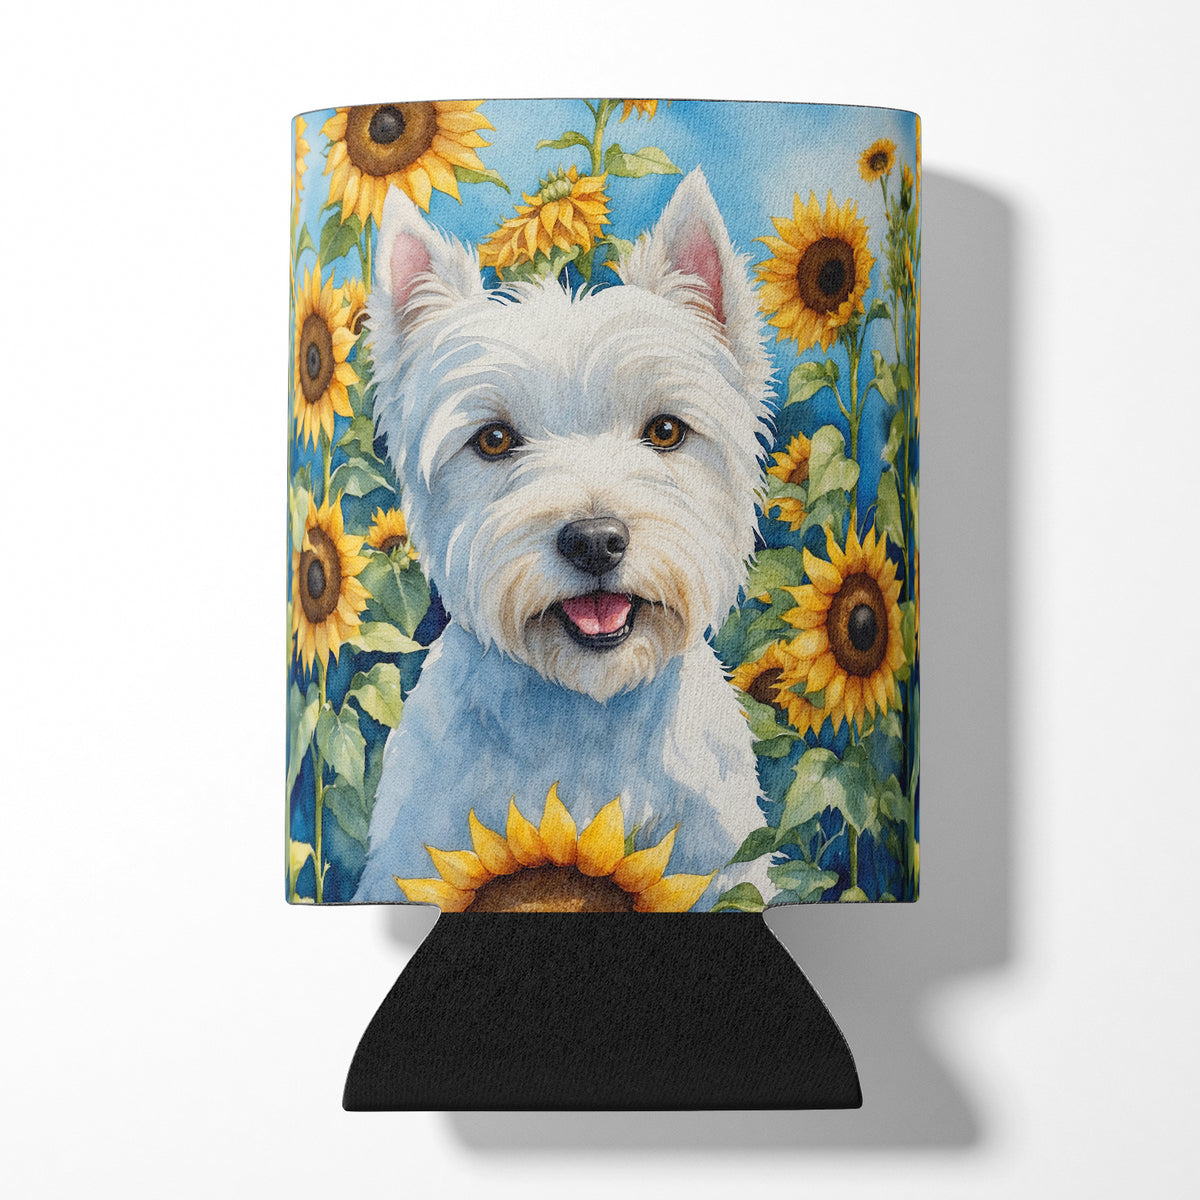 Buy this Westie in Sunflowers Can or Bottle Hugger